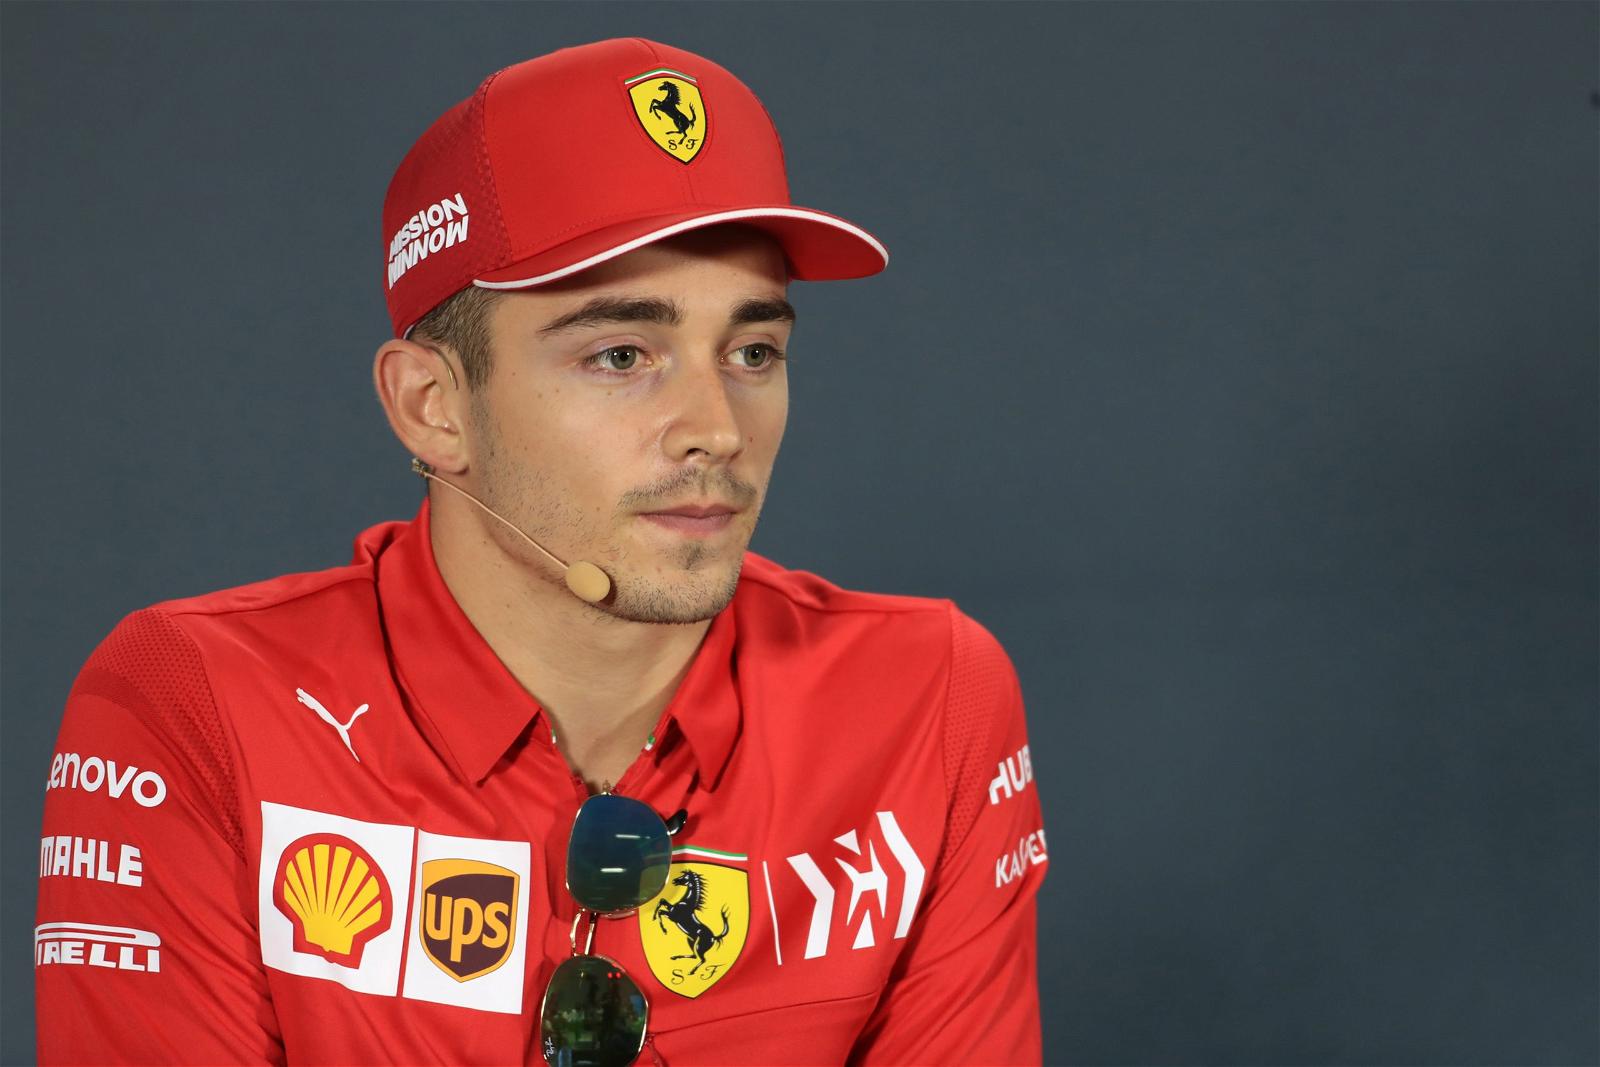 Ferrari Extends Contract With Charles Leclerc